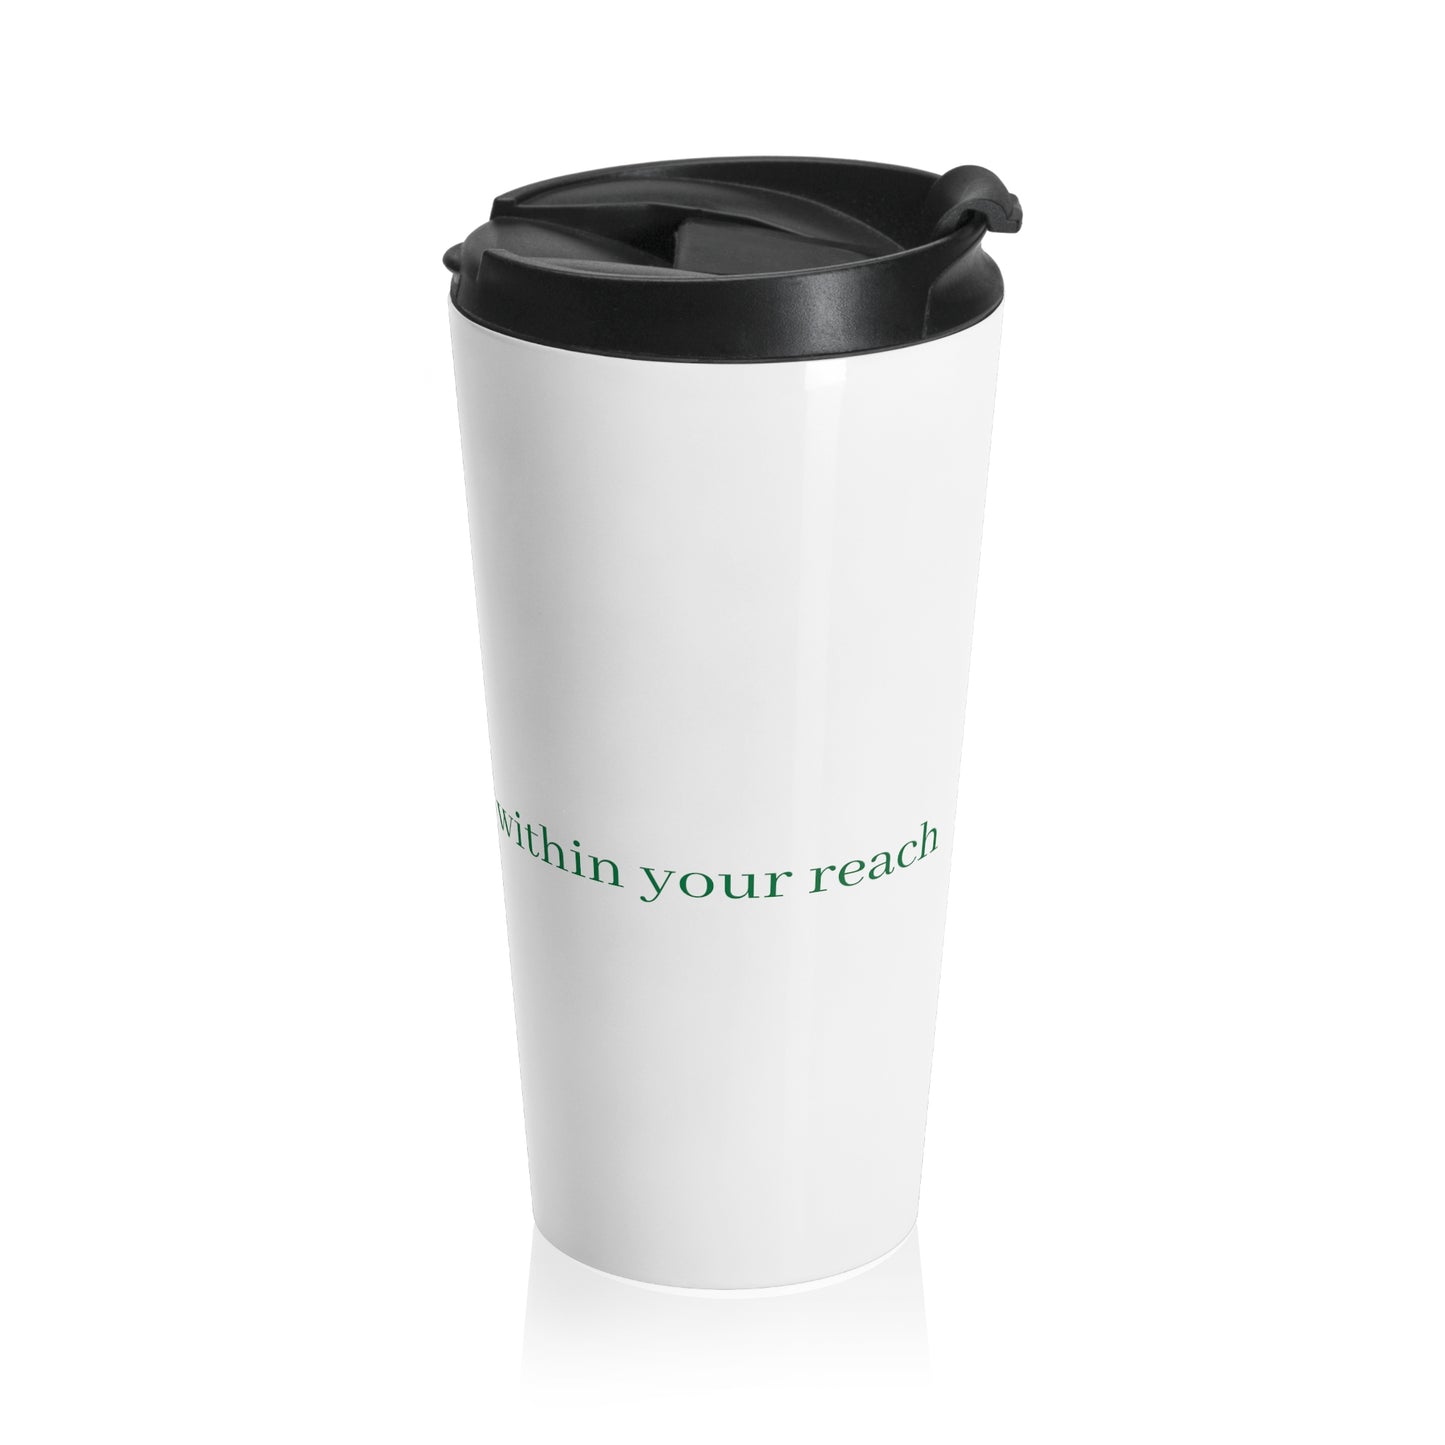 W S Johnson quote Stainless Steel Travel Mug